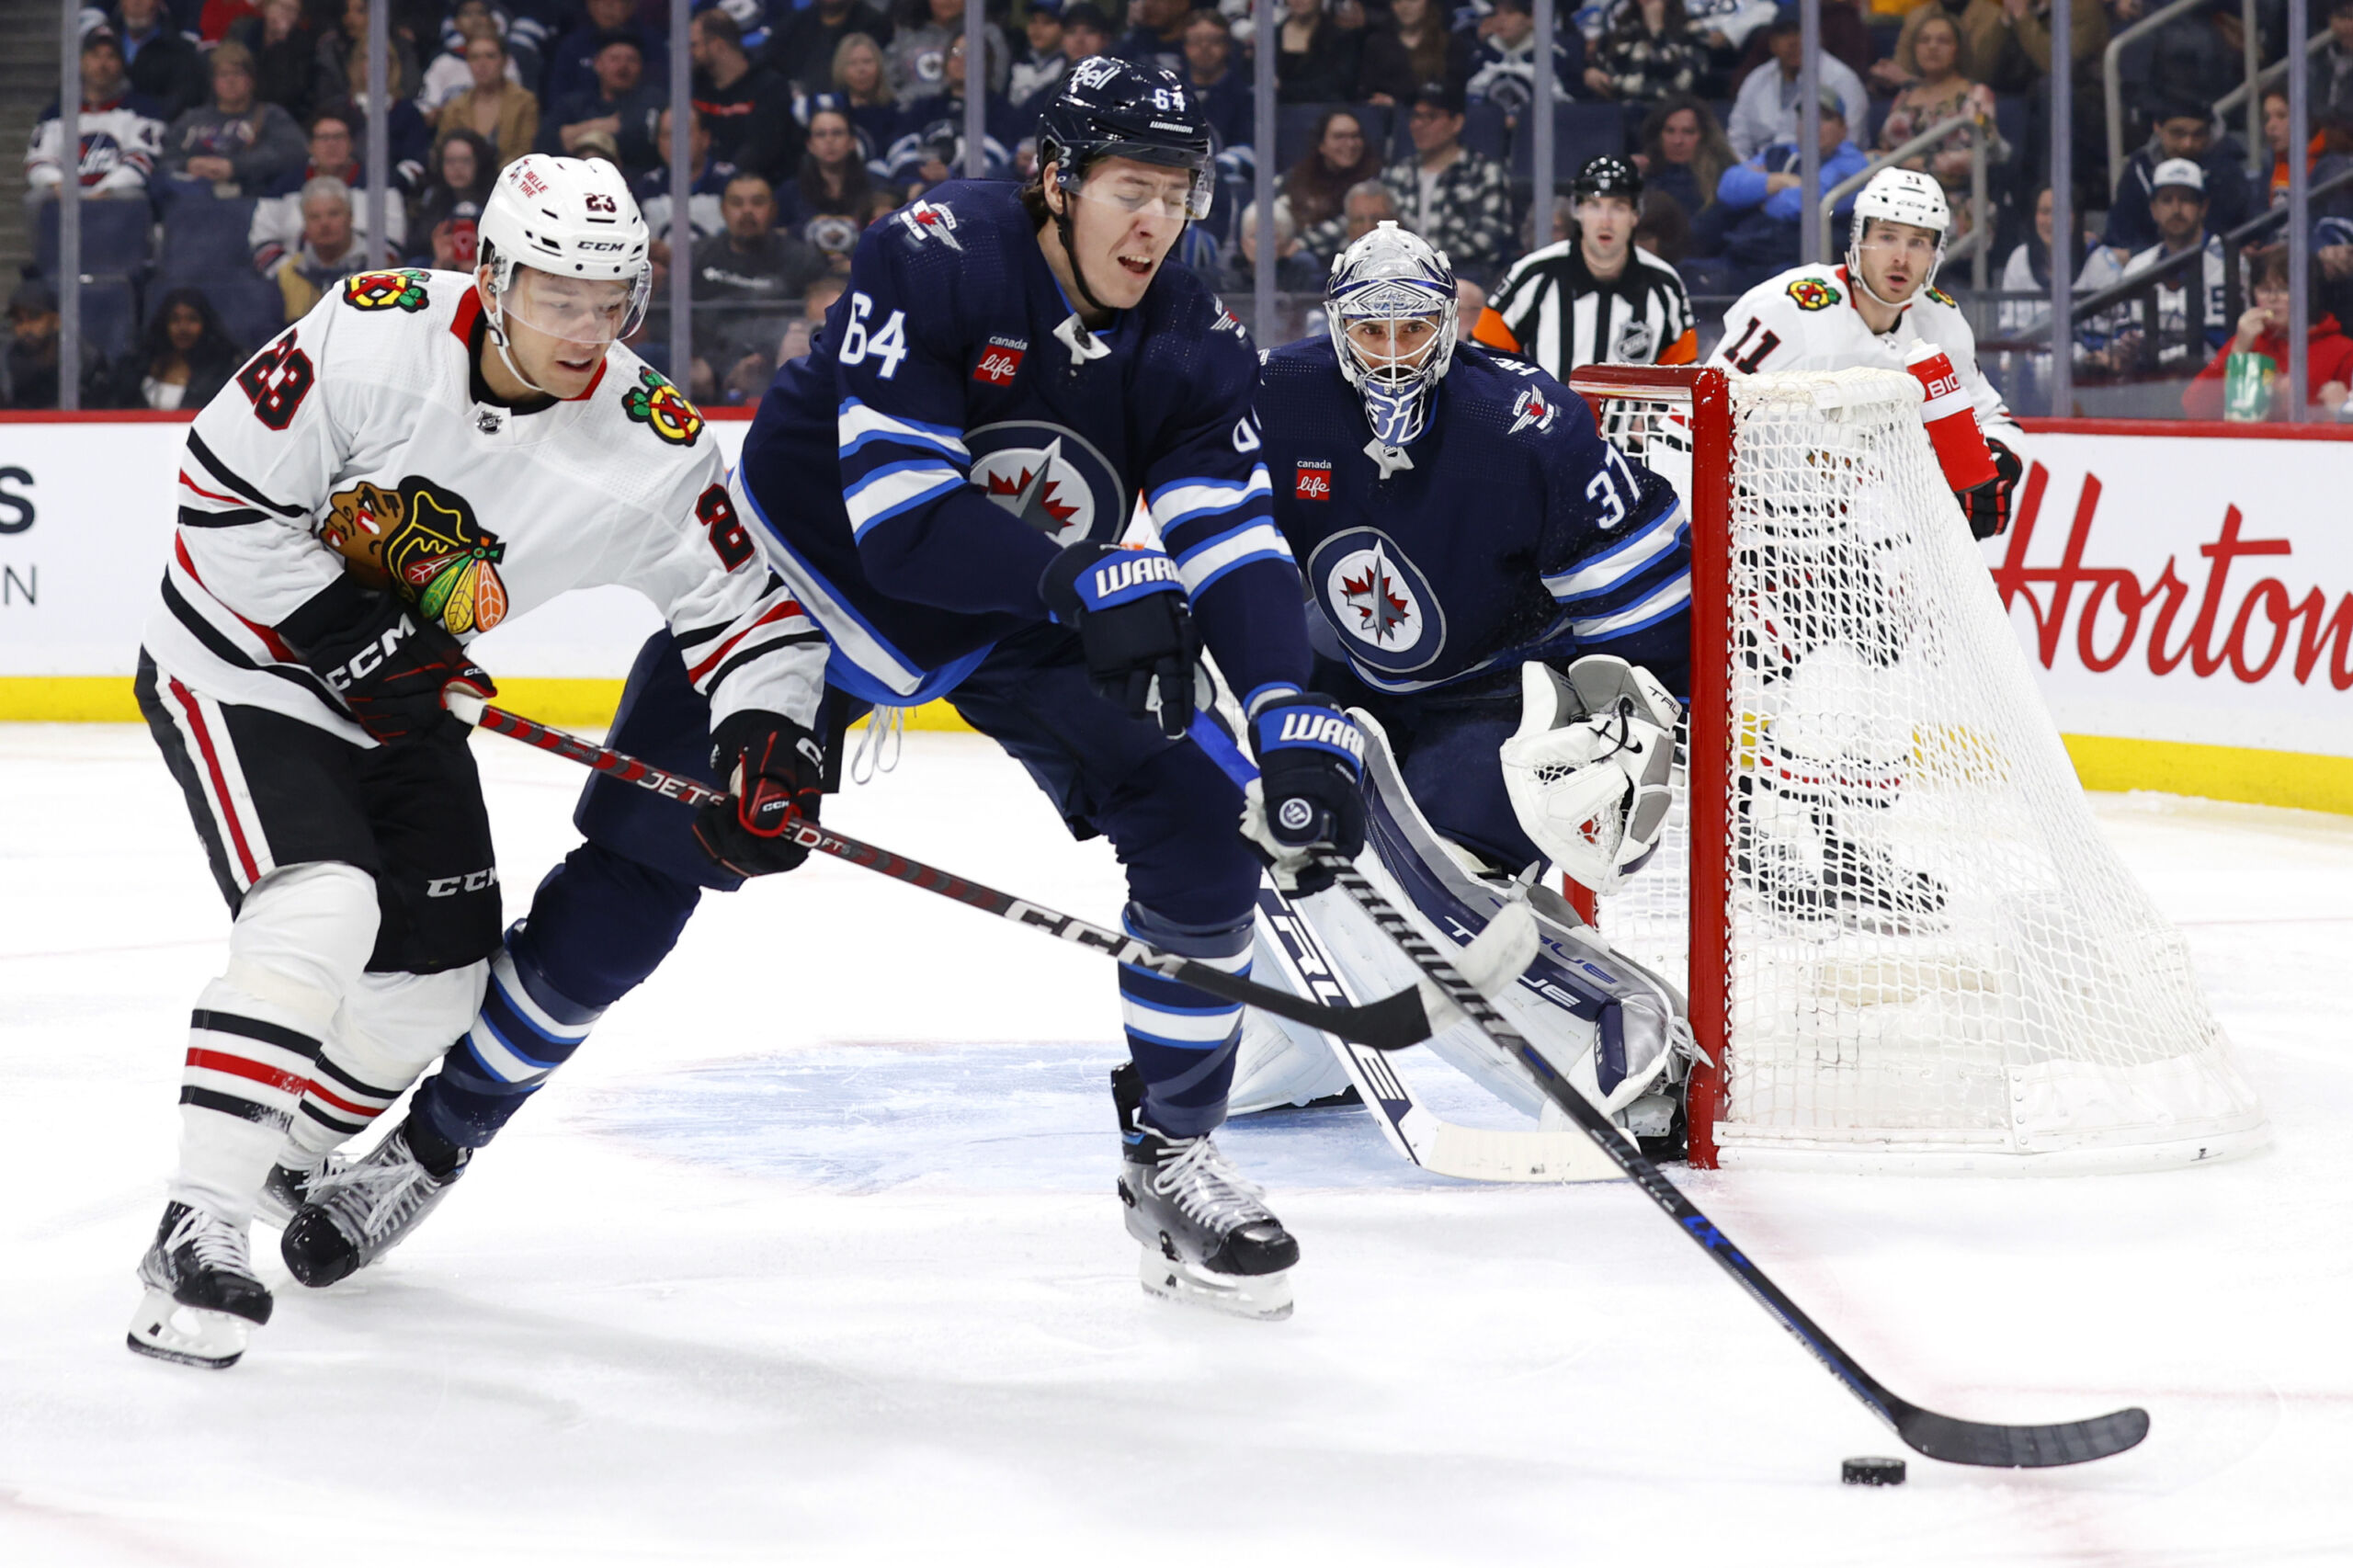 Brad Lambert is Making a Great Case to Make the Winnipeg Jets Roster